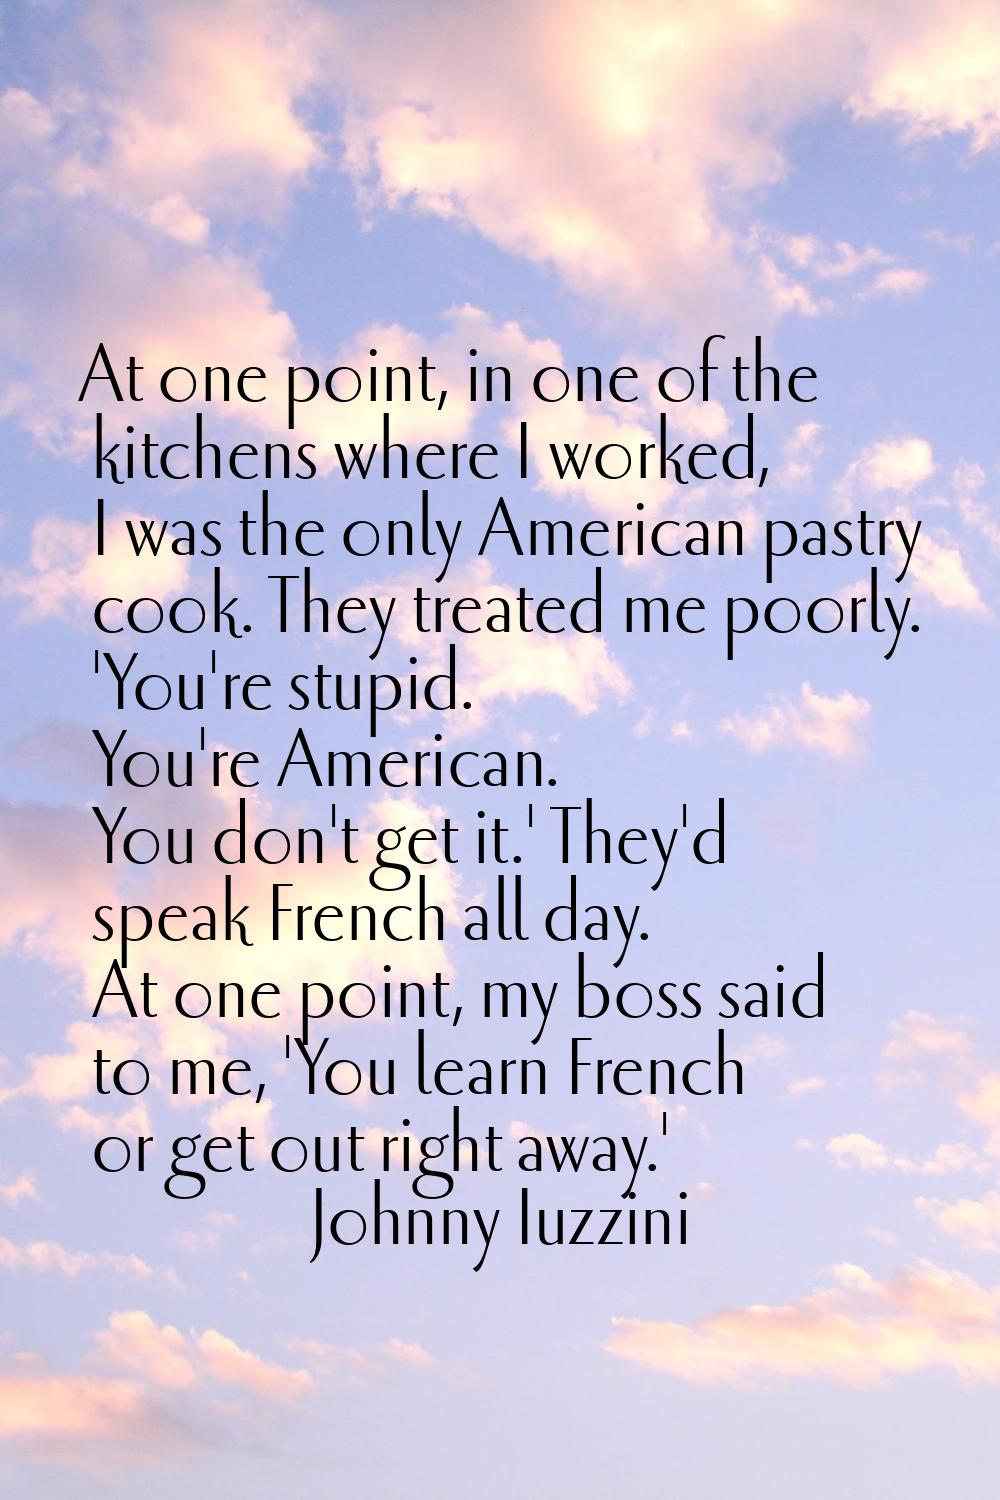 At one point, in one of the kitchens where I worked, I was the only American pastry cook. They trea